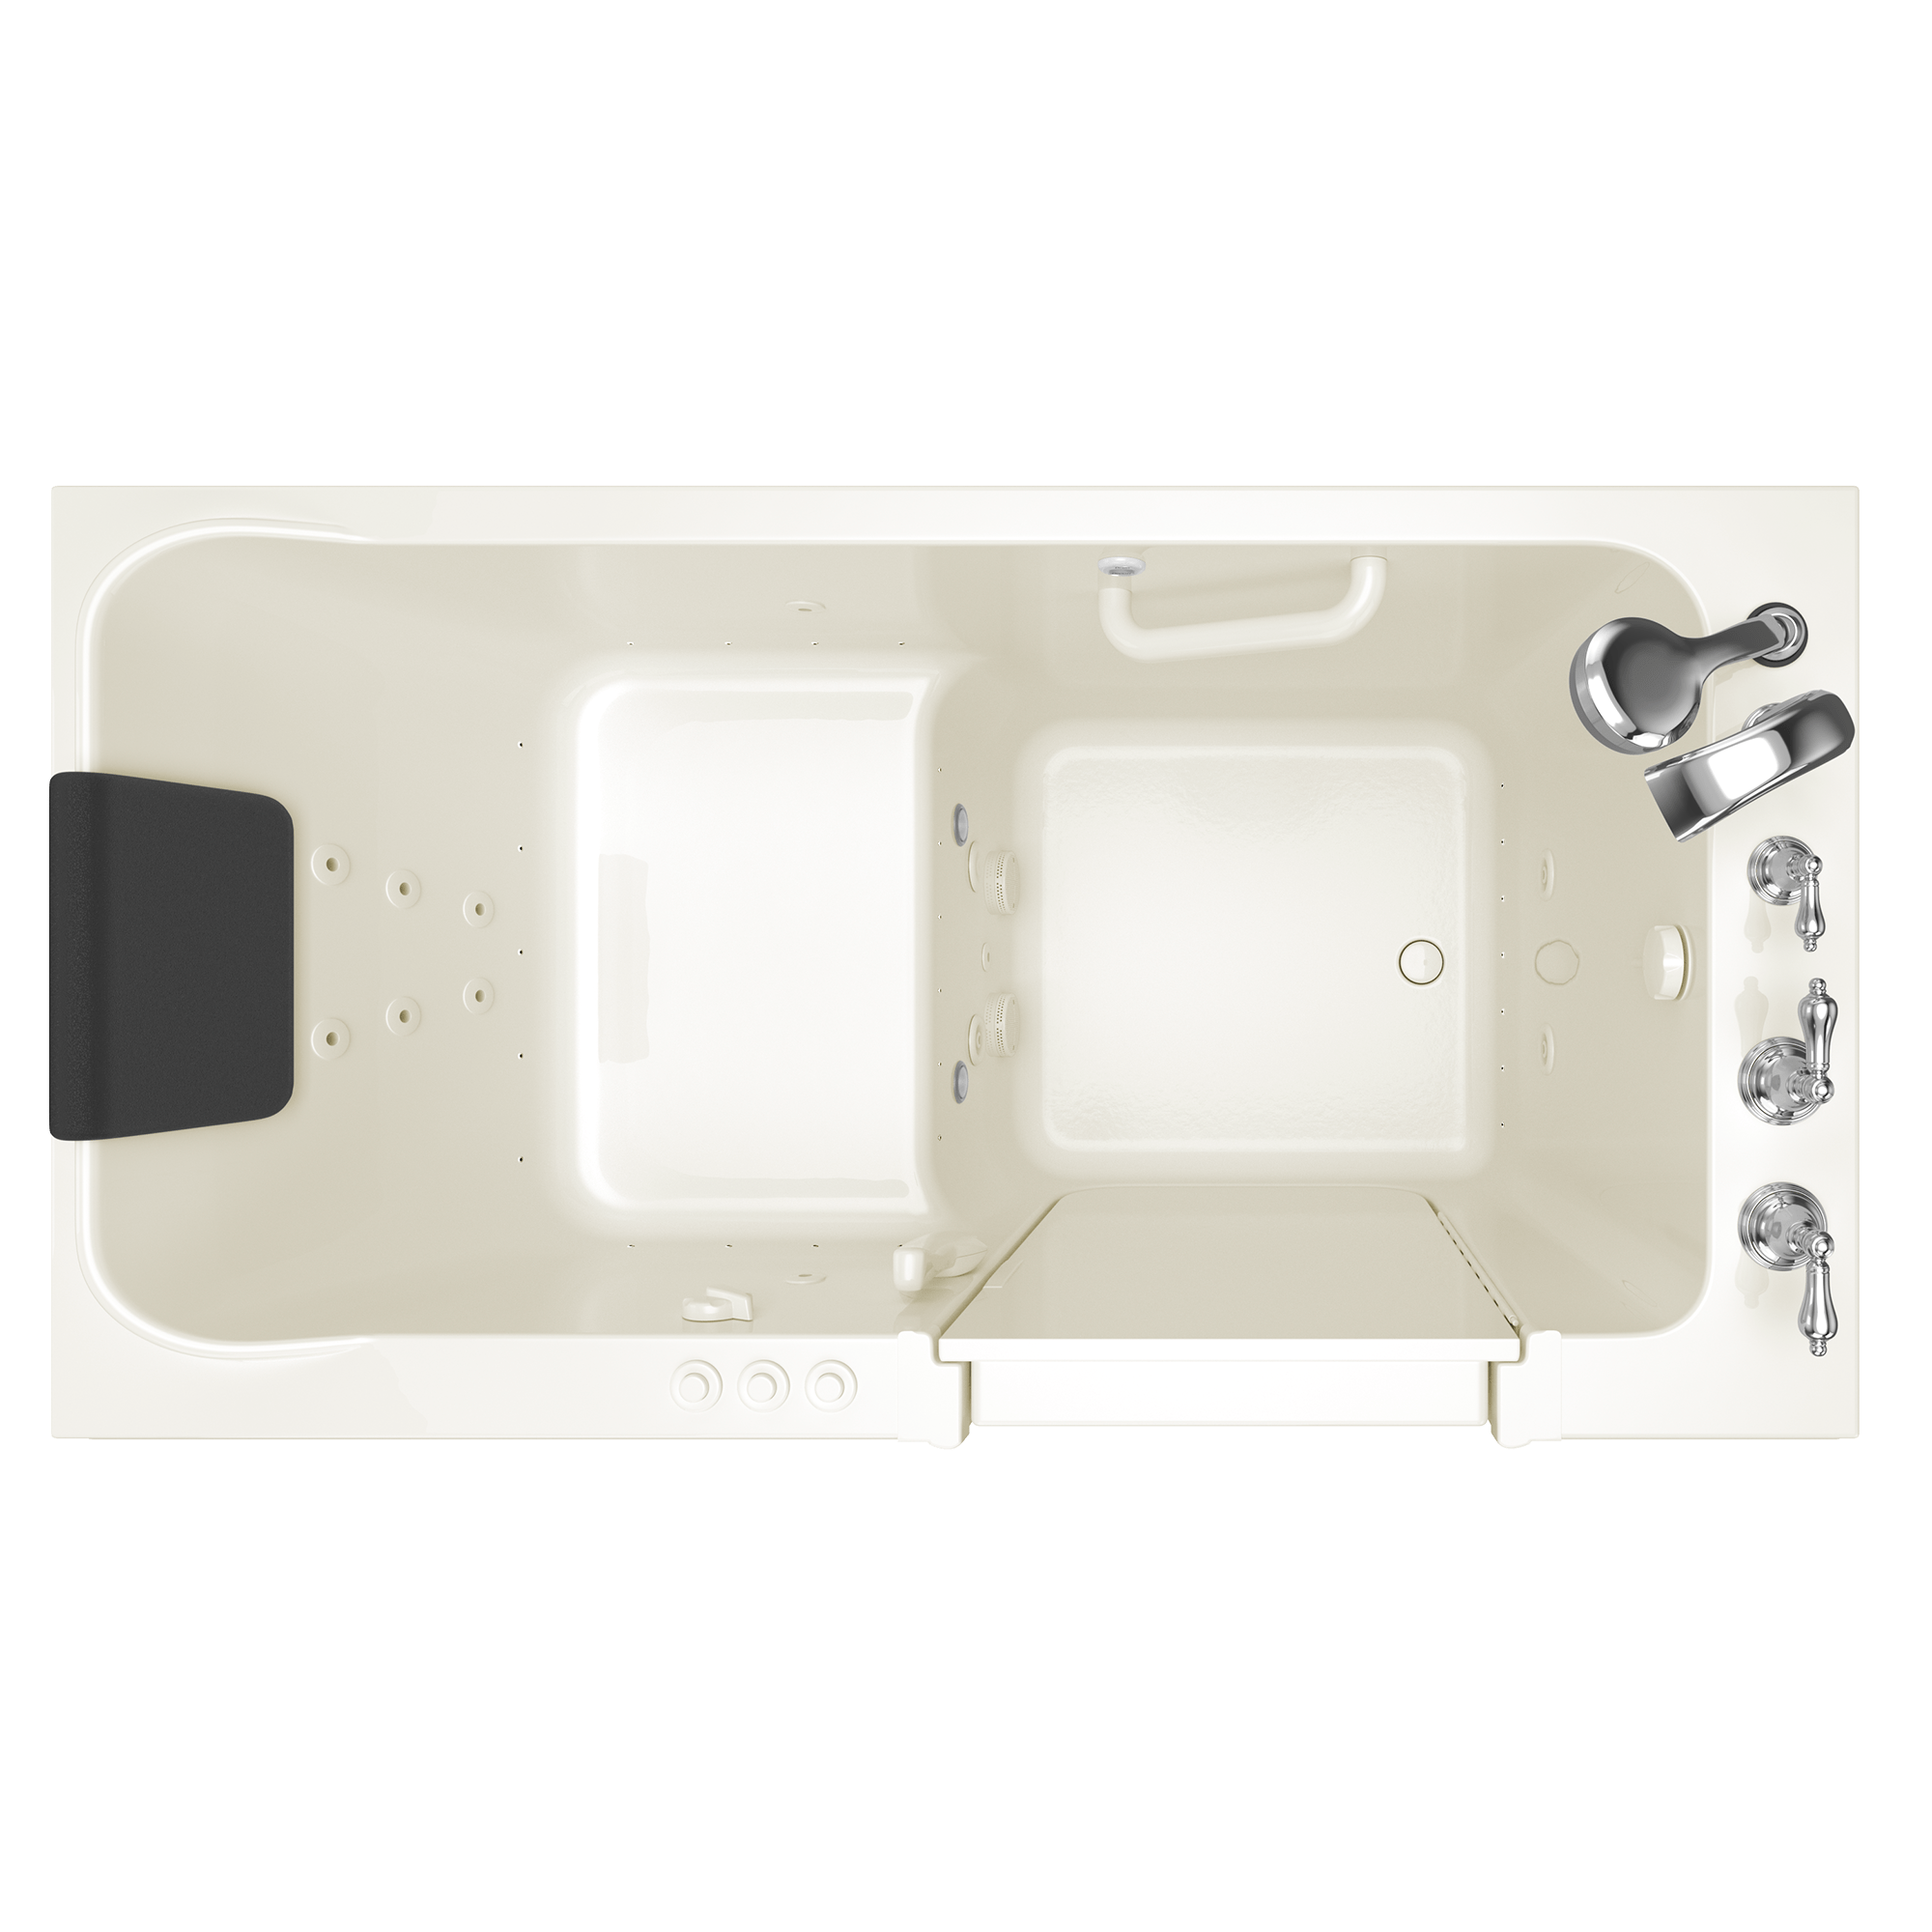 Acrylic Luxury Series 32 x 60  Inch Walk in Tub With Combination Air Spa and Whirlpool Systems   Right Hand Drain With Faucet WIB LINEN